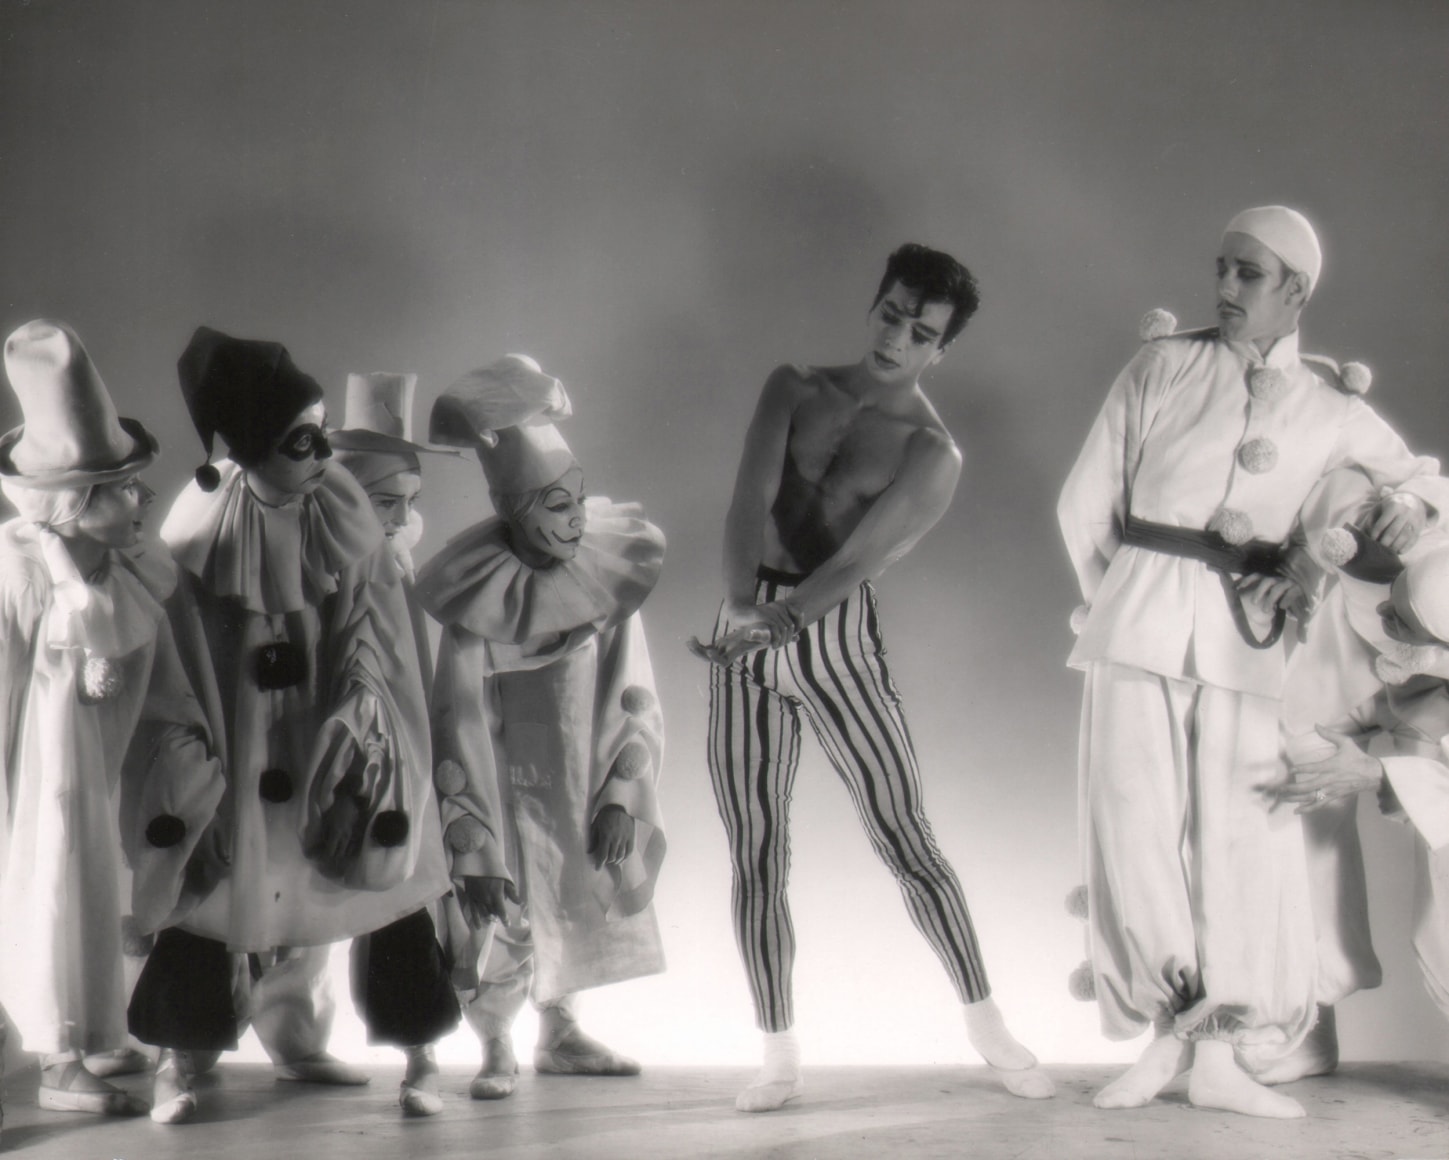 George Platt Lynes, Illumination, Nicholas Magallanes &amp; Brooks Jackson, ​c. 1950. Seven dancers pose in clown costumes. All looking to the central shirtless male figure.